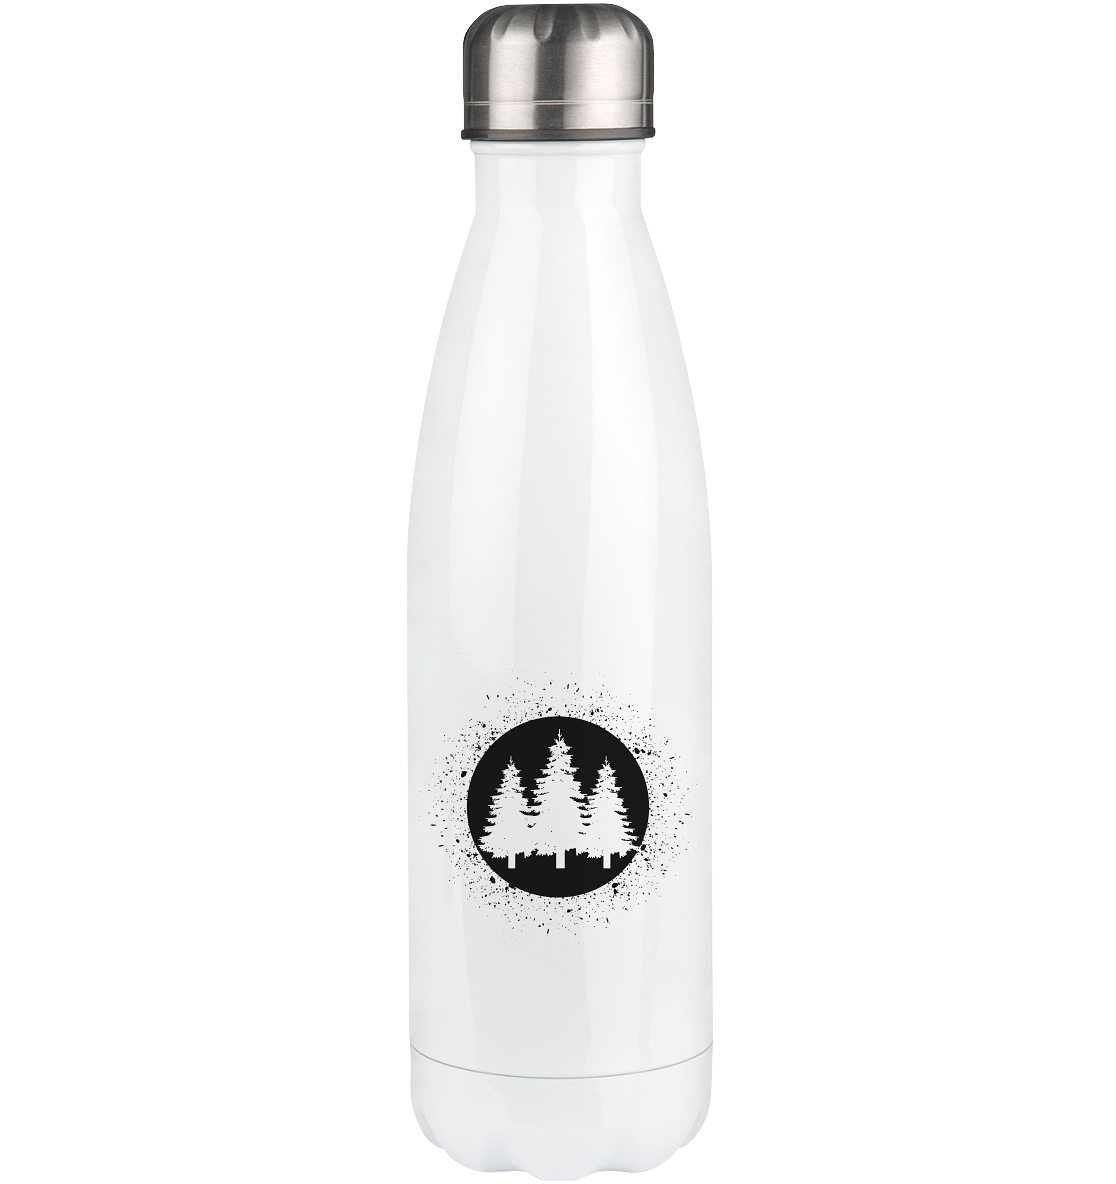 Circle with Splash and Trees - Edelstahl Thermosflasche camping UONP 500ml